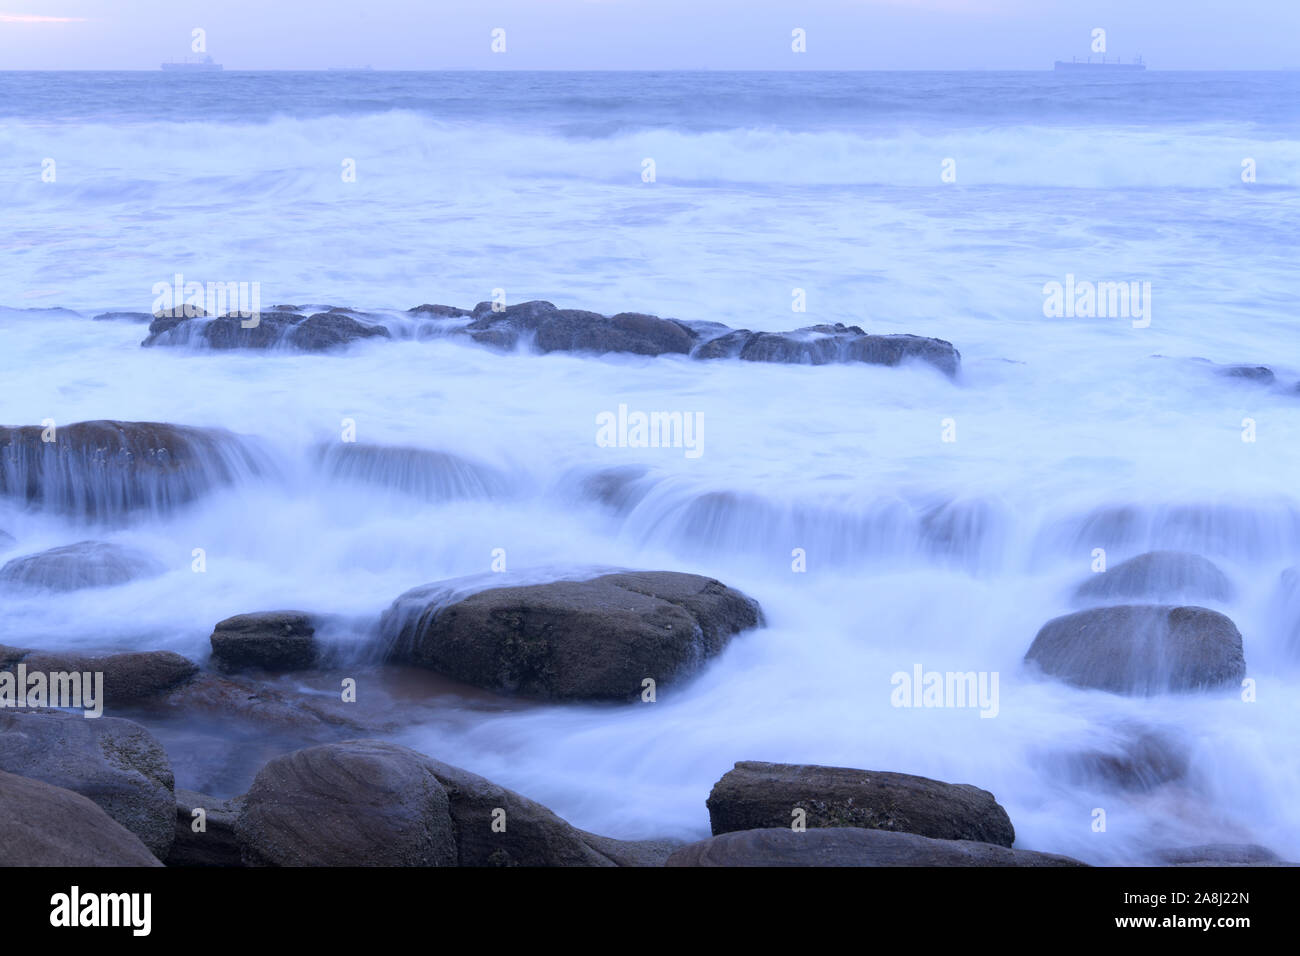 Durban, South Africa, motion blur, beauty in nature, seascape, flowing water, Umhlanga Rocks beach, landscape, graphic, background Stock Photo